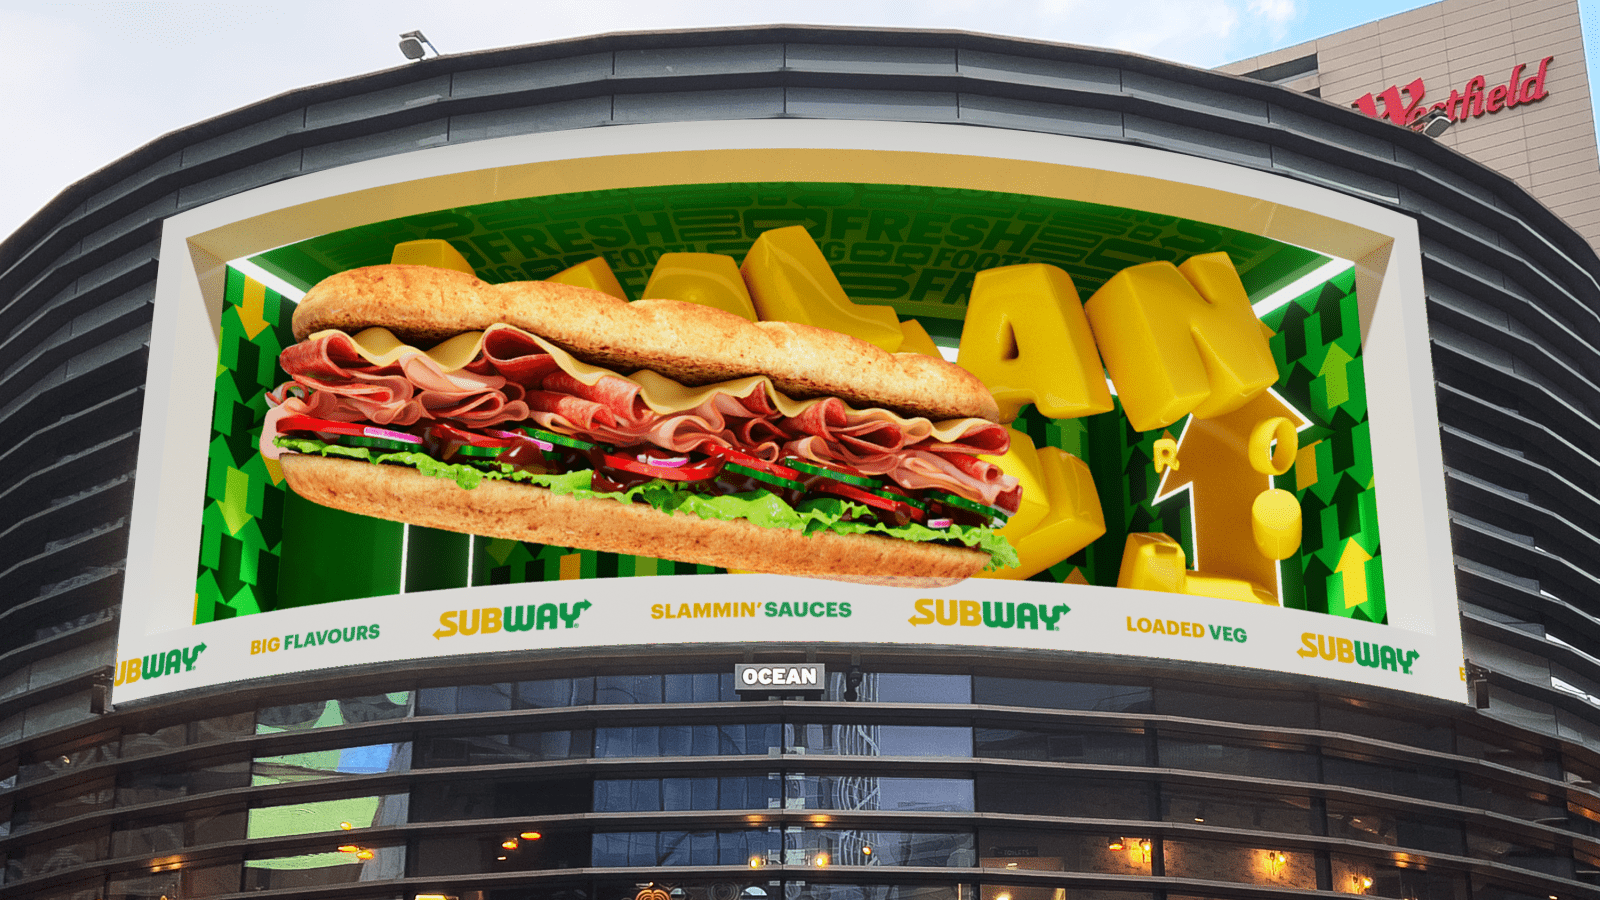 Build Your Own Sub – The World’s first fully interactive 3D billboard